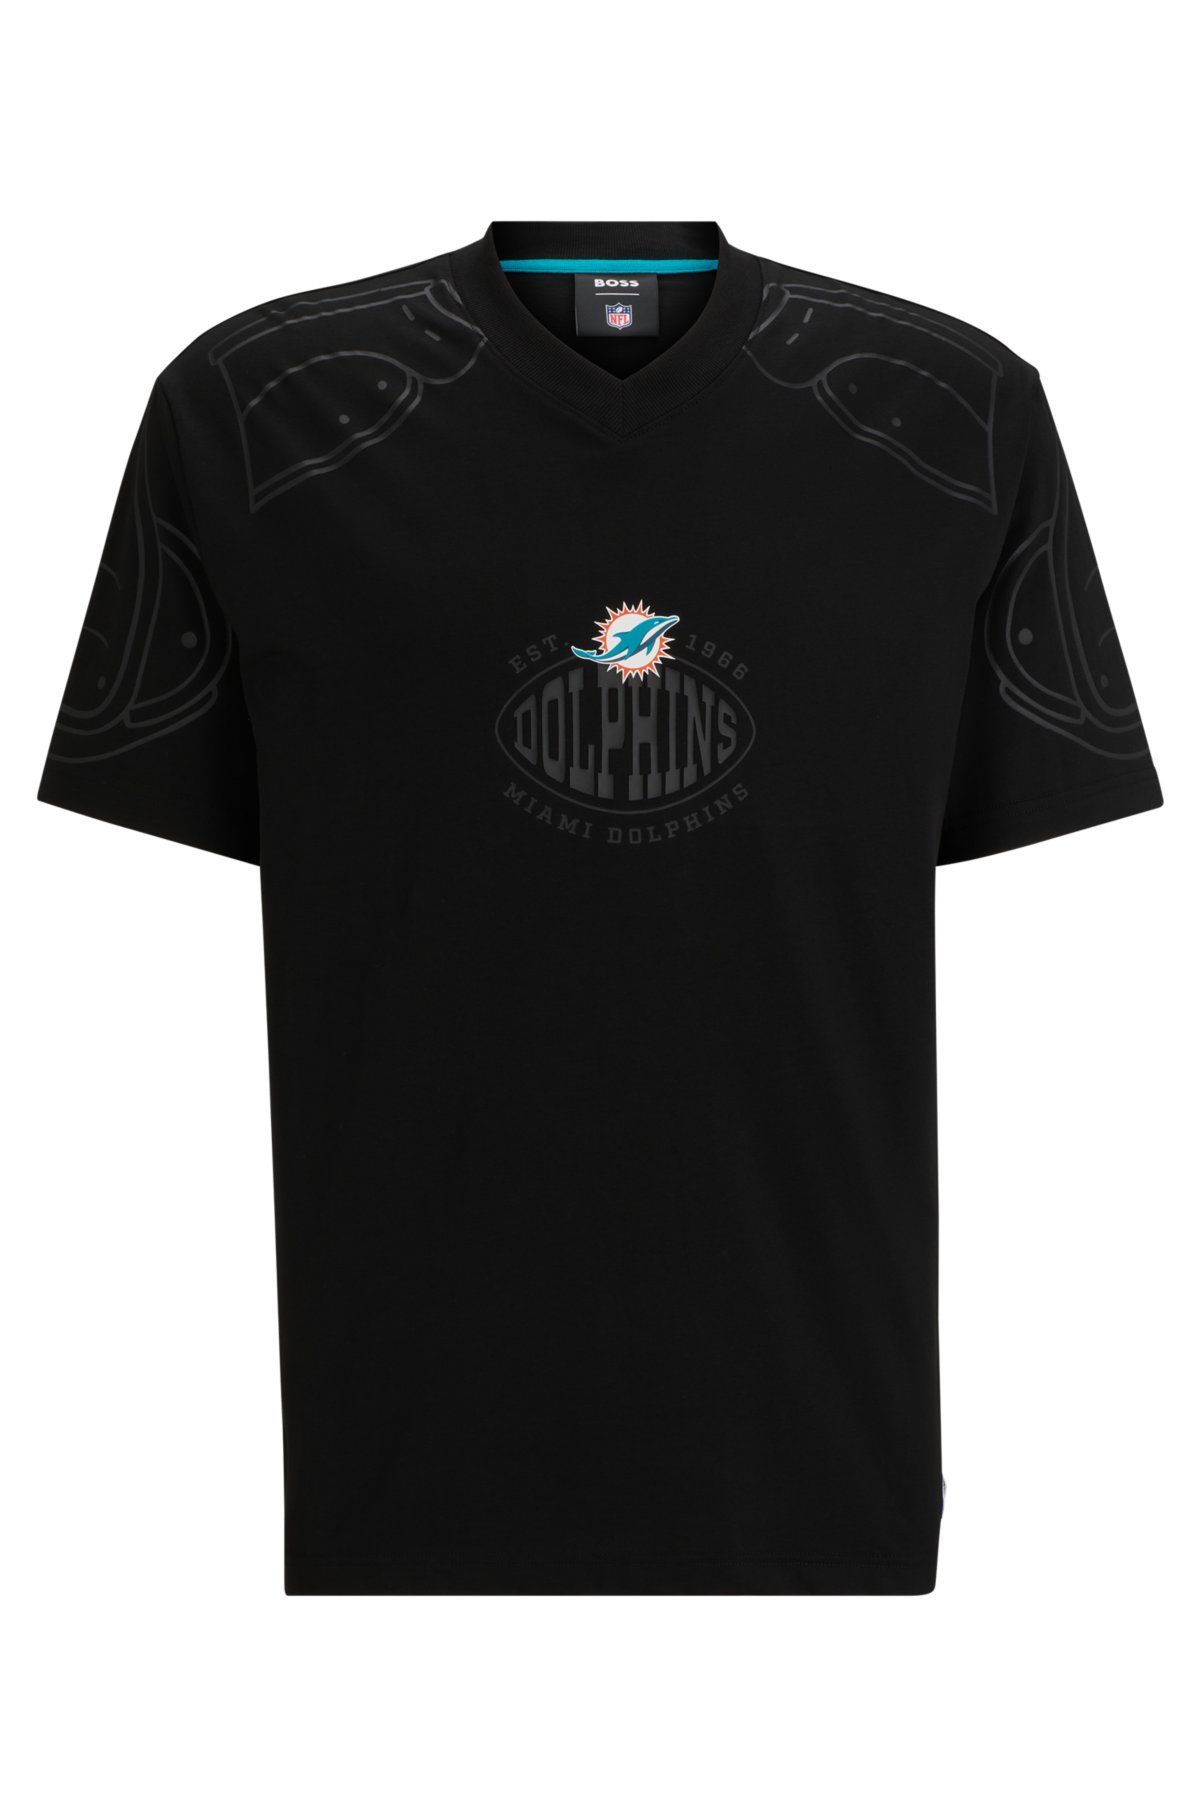 BOSS x NFL oversize-fit T-shirt with collaborative branding, Dolphins